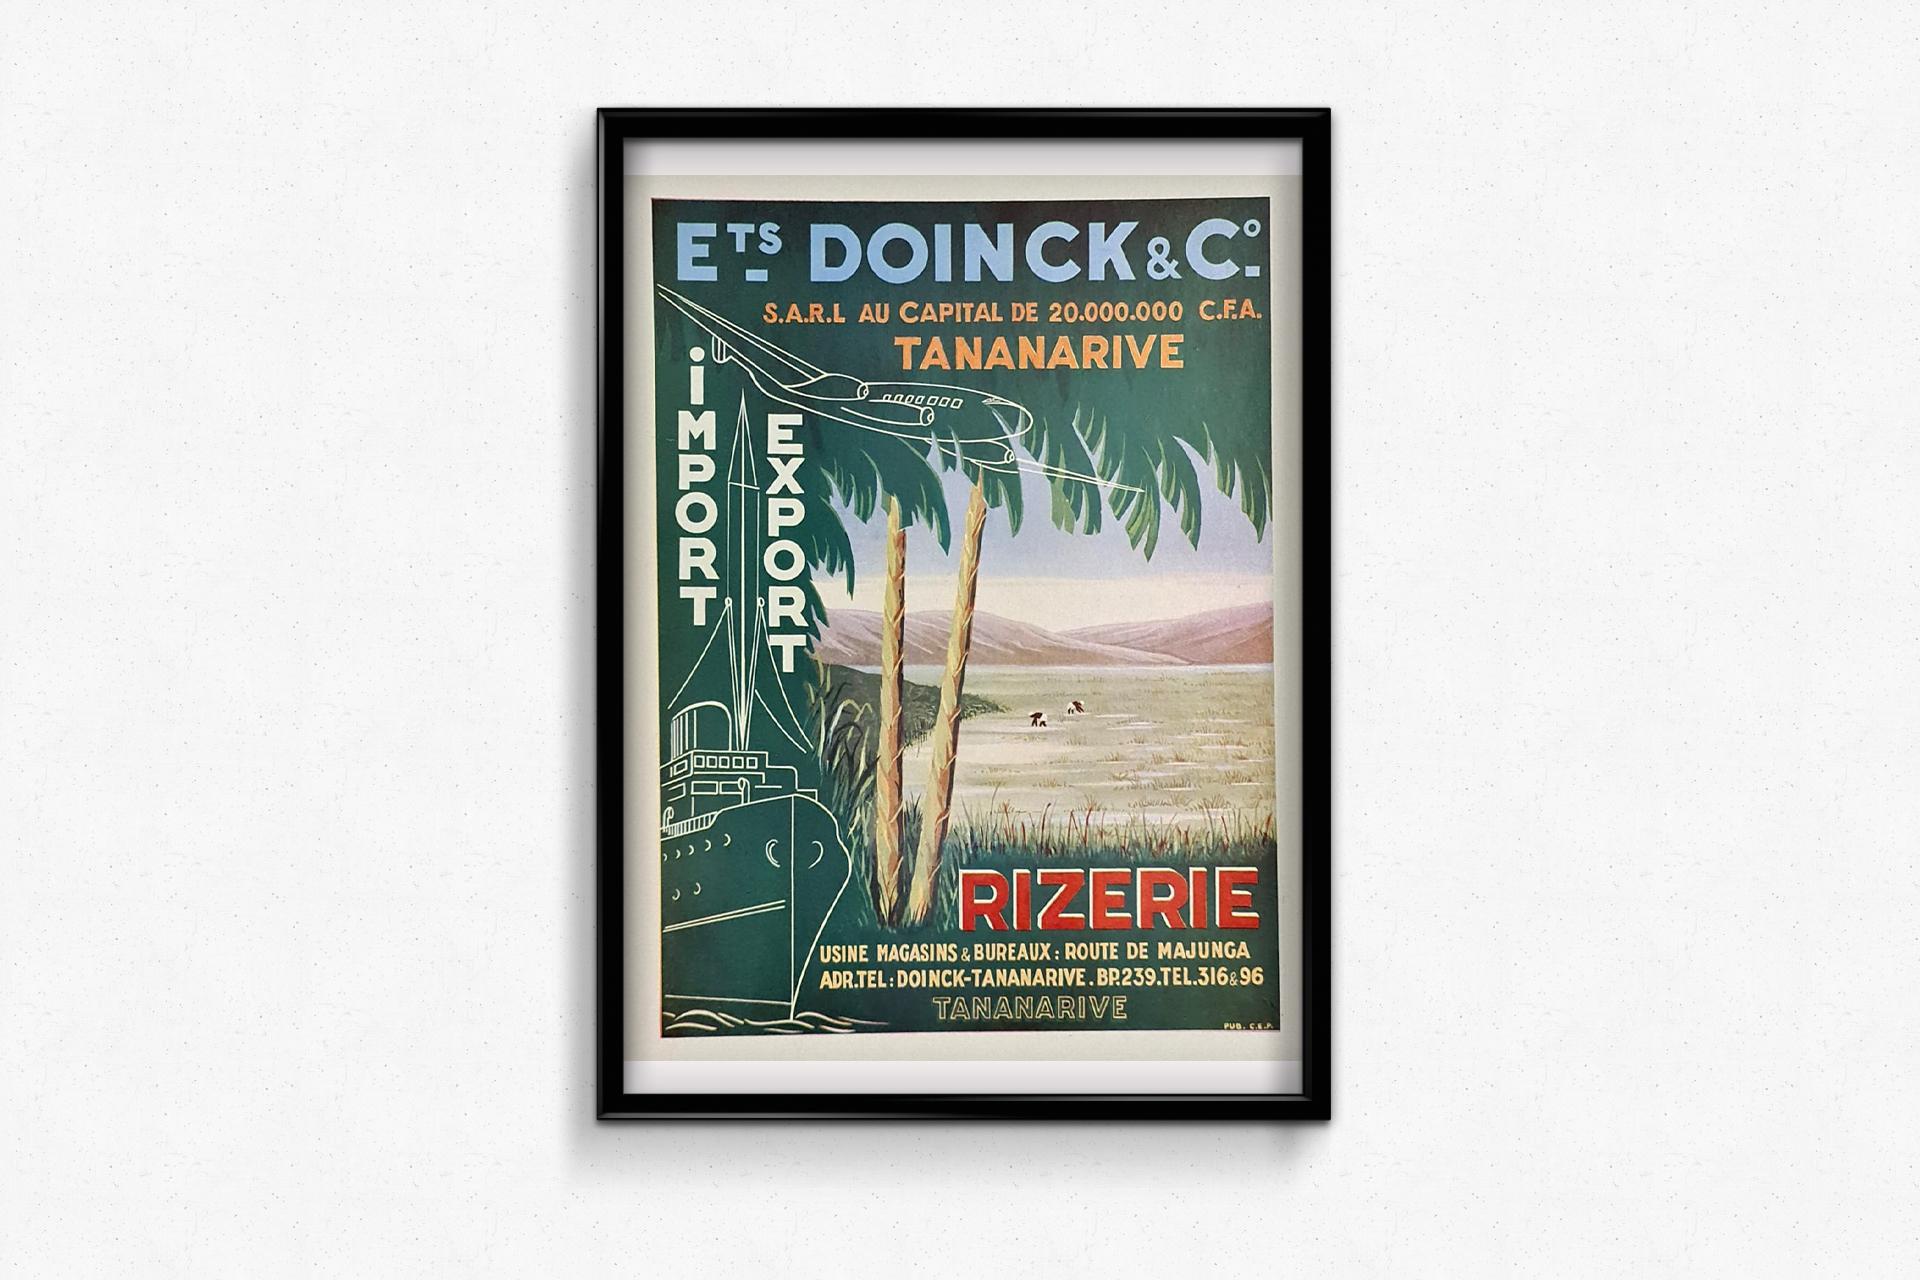 Original poster, realized in the 1930s, for the company 